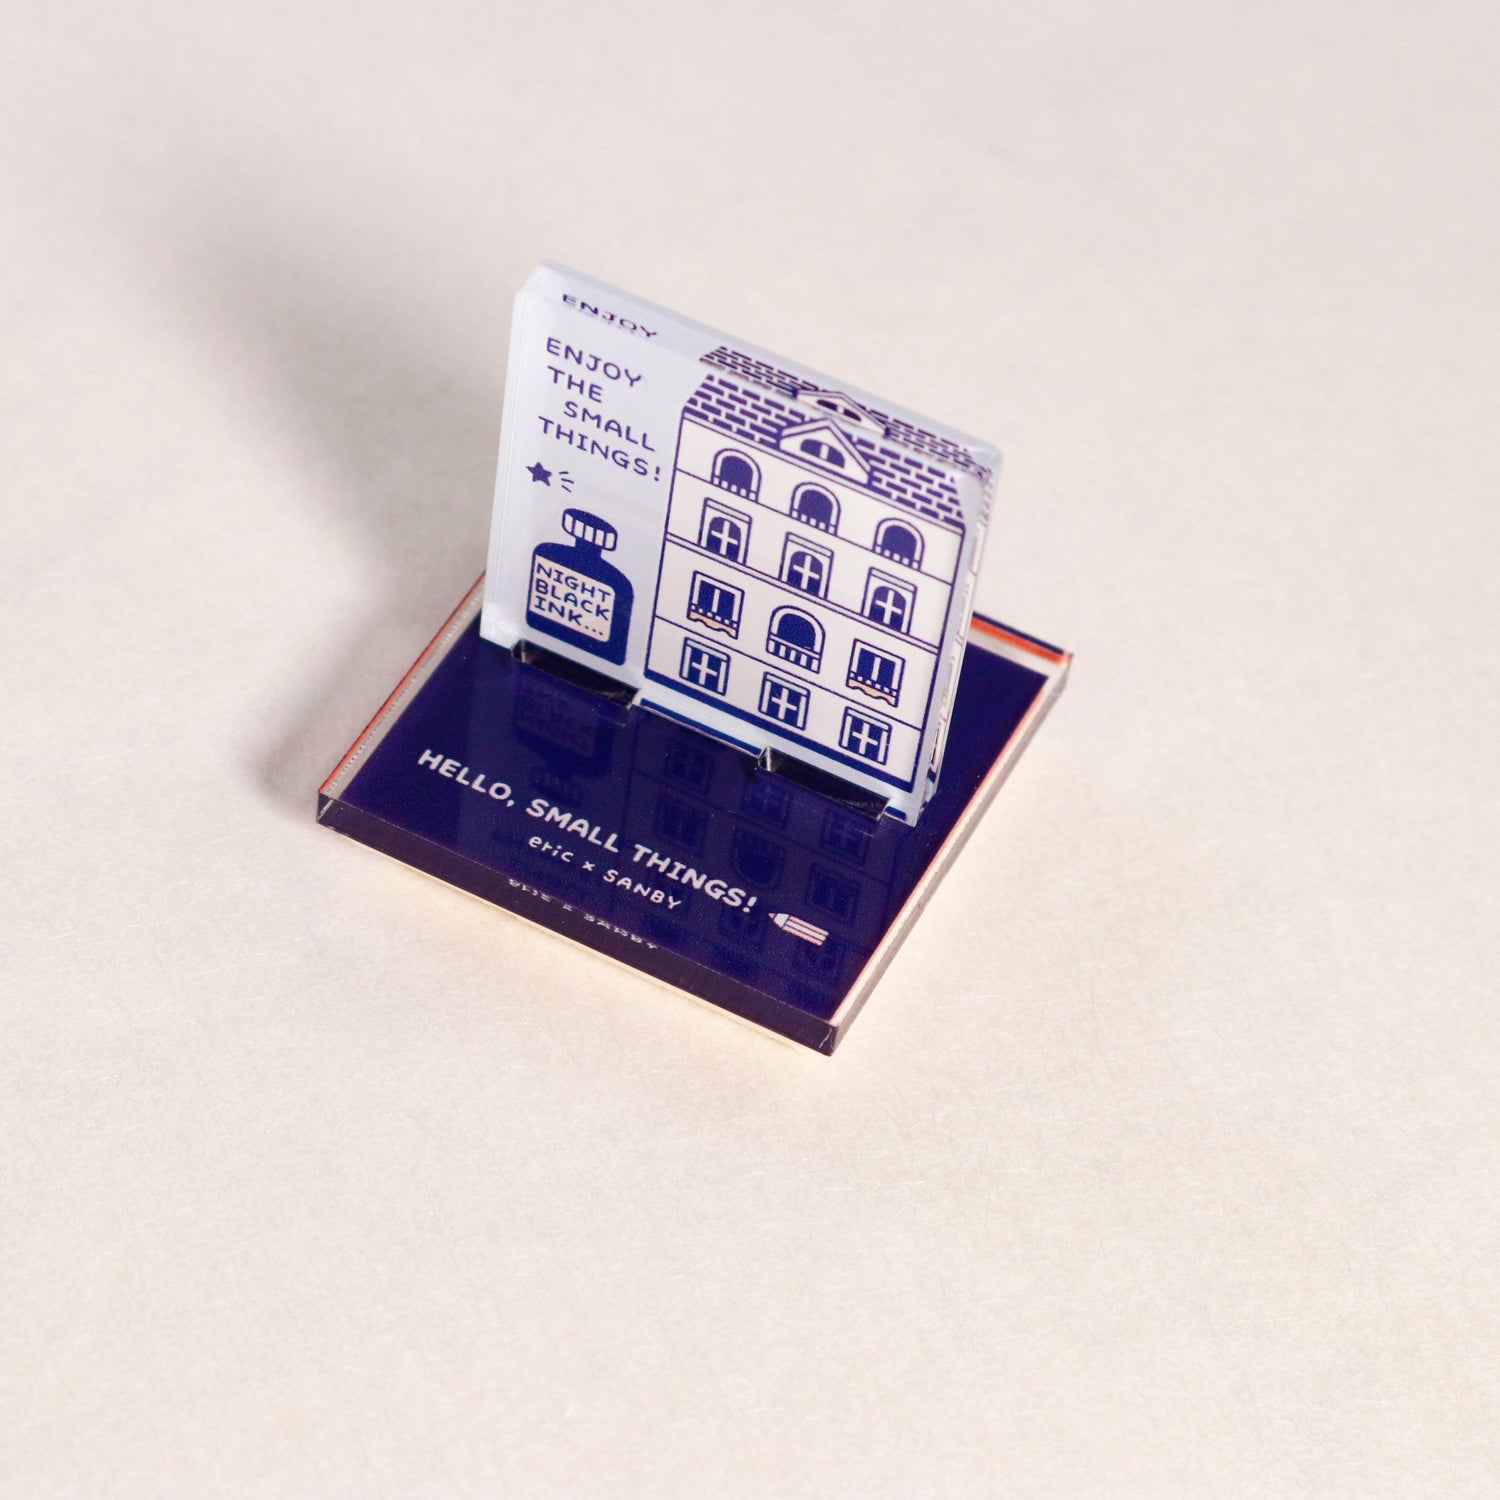 eric Acrylic Stand Stamp Vol.1 - Town - Techo Treats